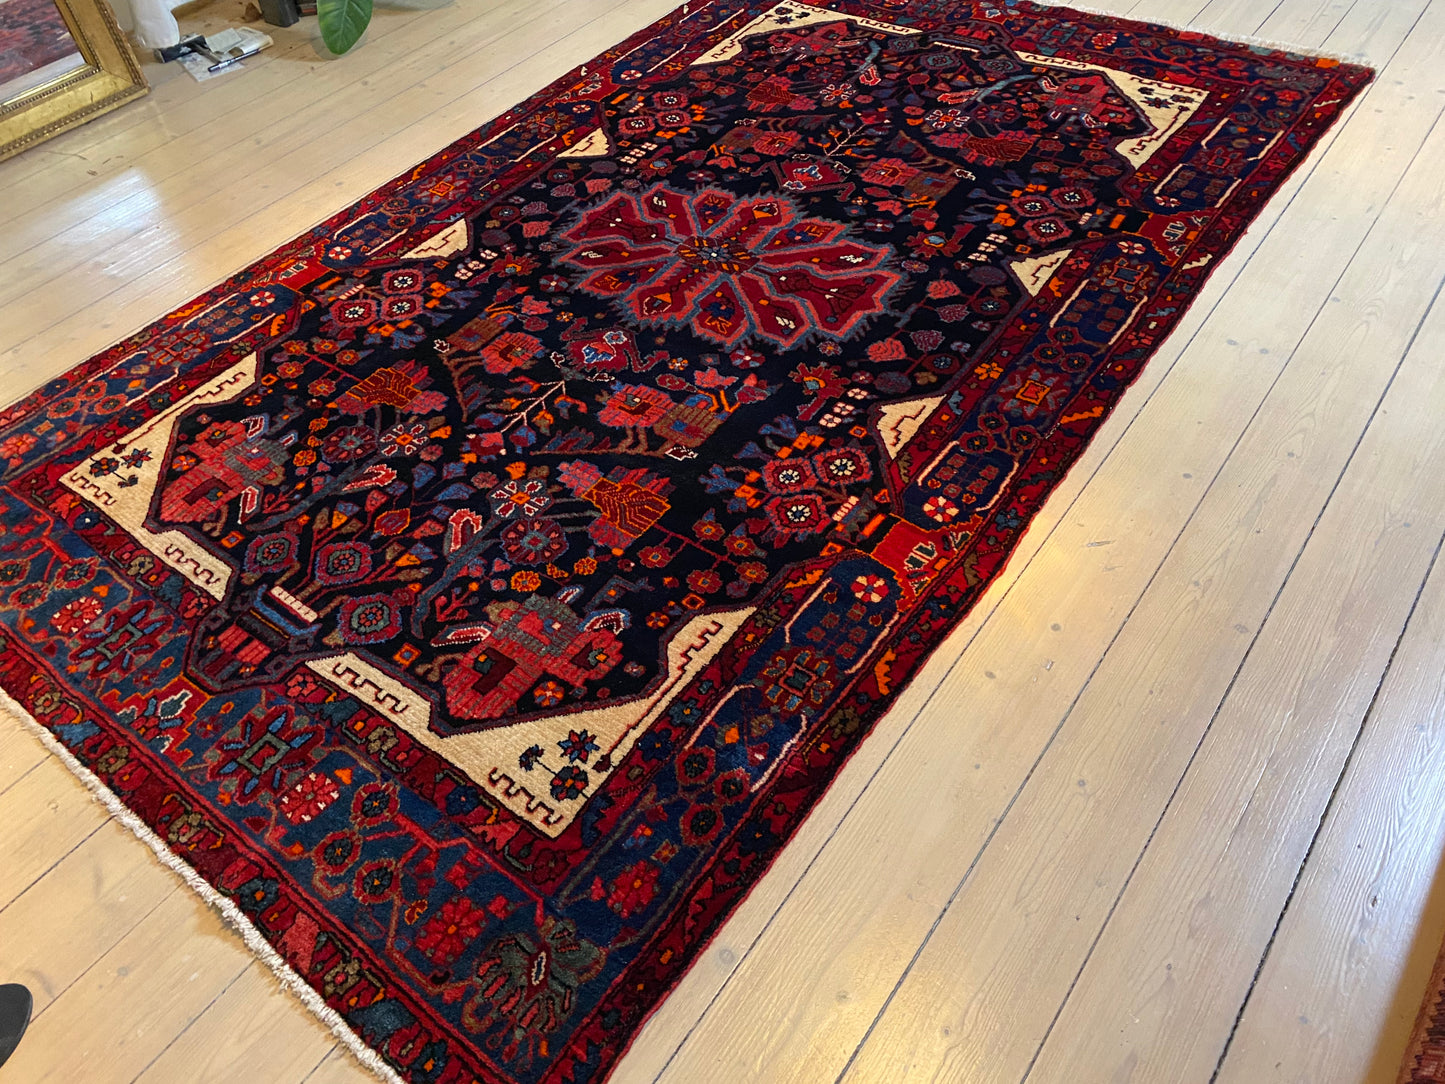 Nahavand Persian handmade carpet with a wounderful color setting, in mint condition, size 148 x 198 cm!